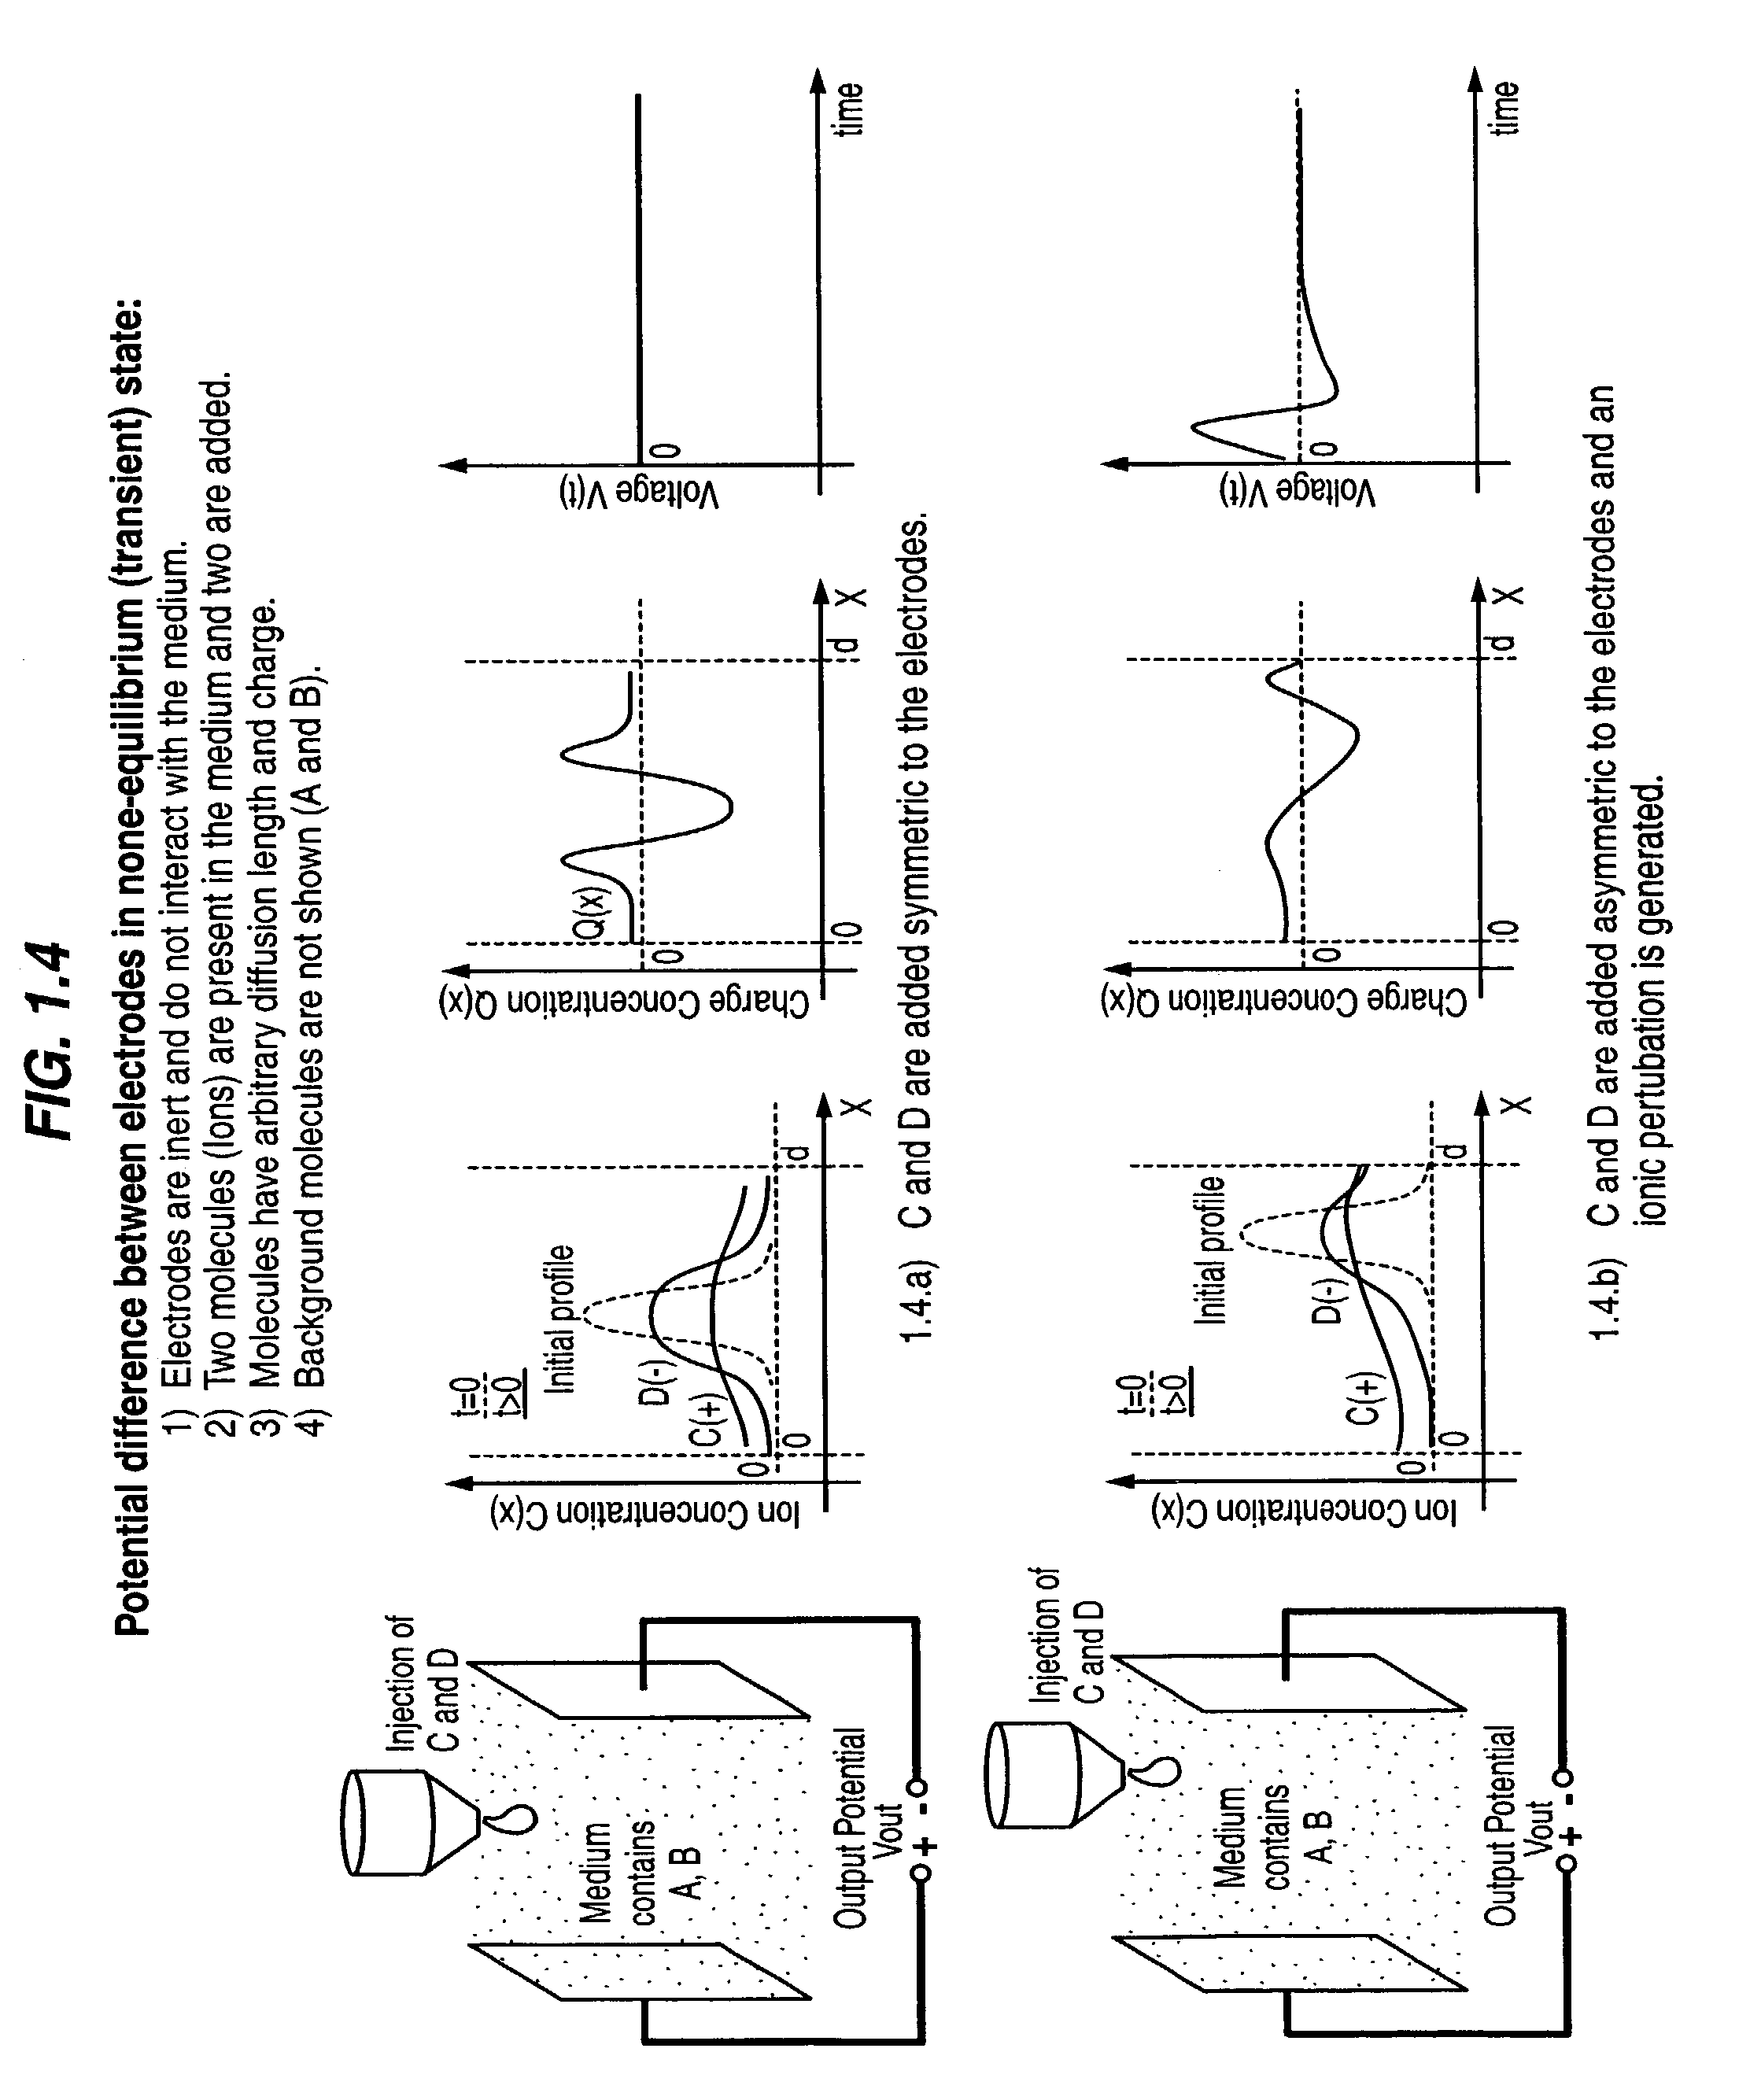 Transient electrical signal based methods and devices for characterizing molecular interaction and/or motion in a sample